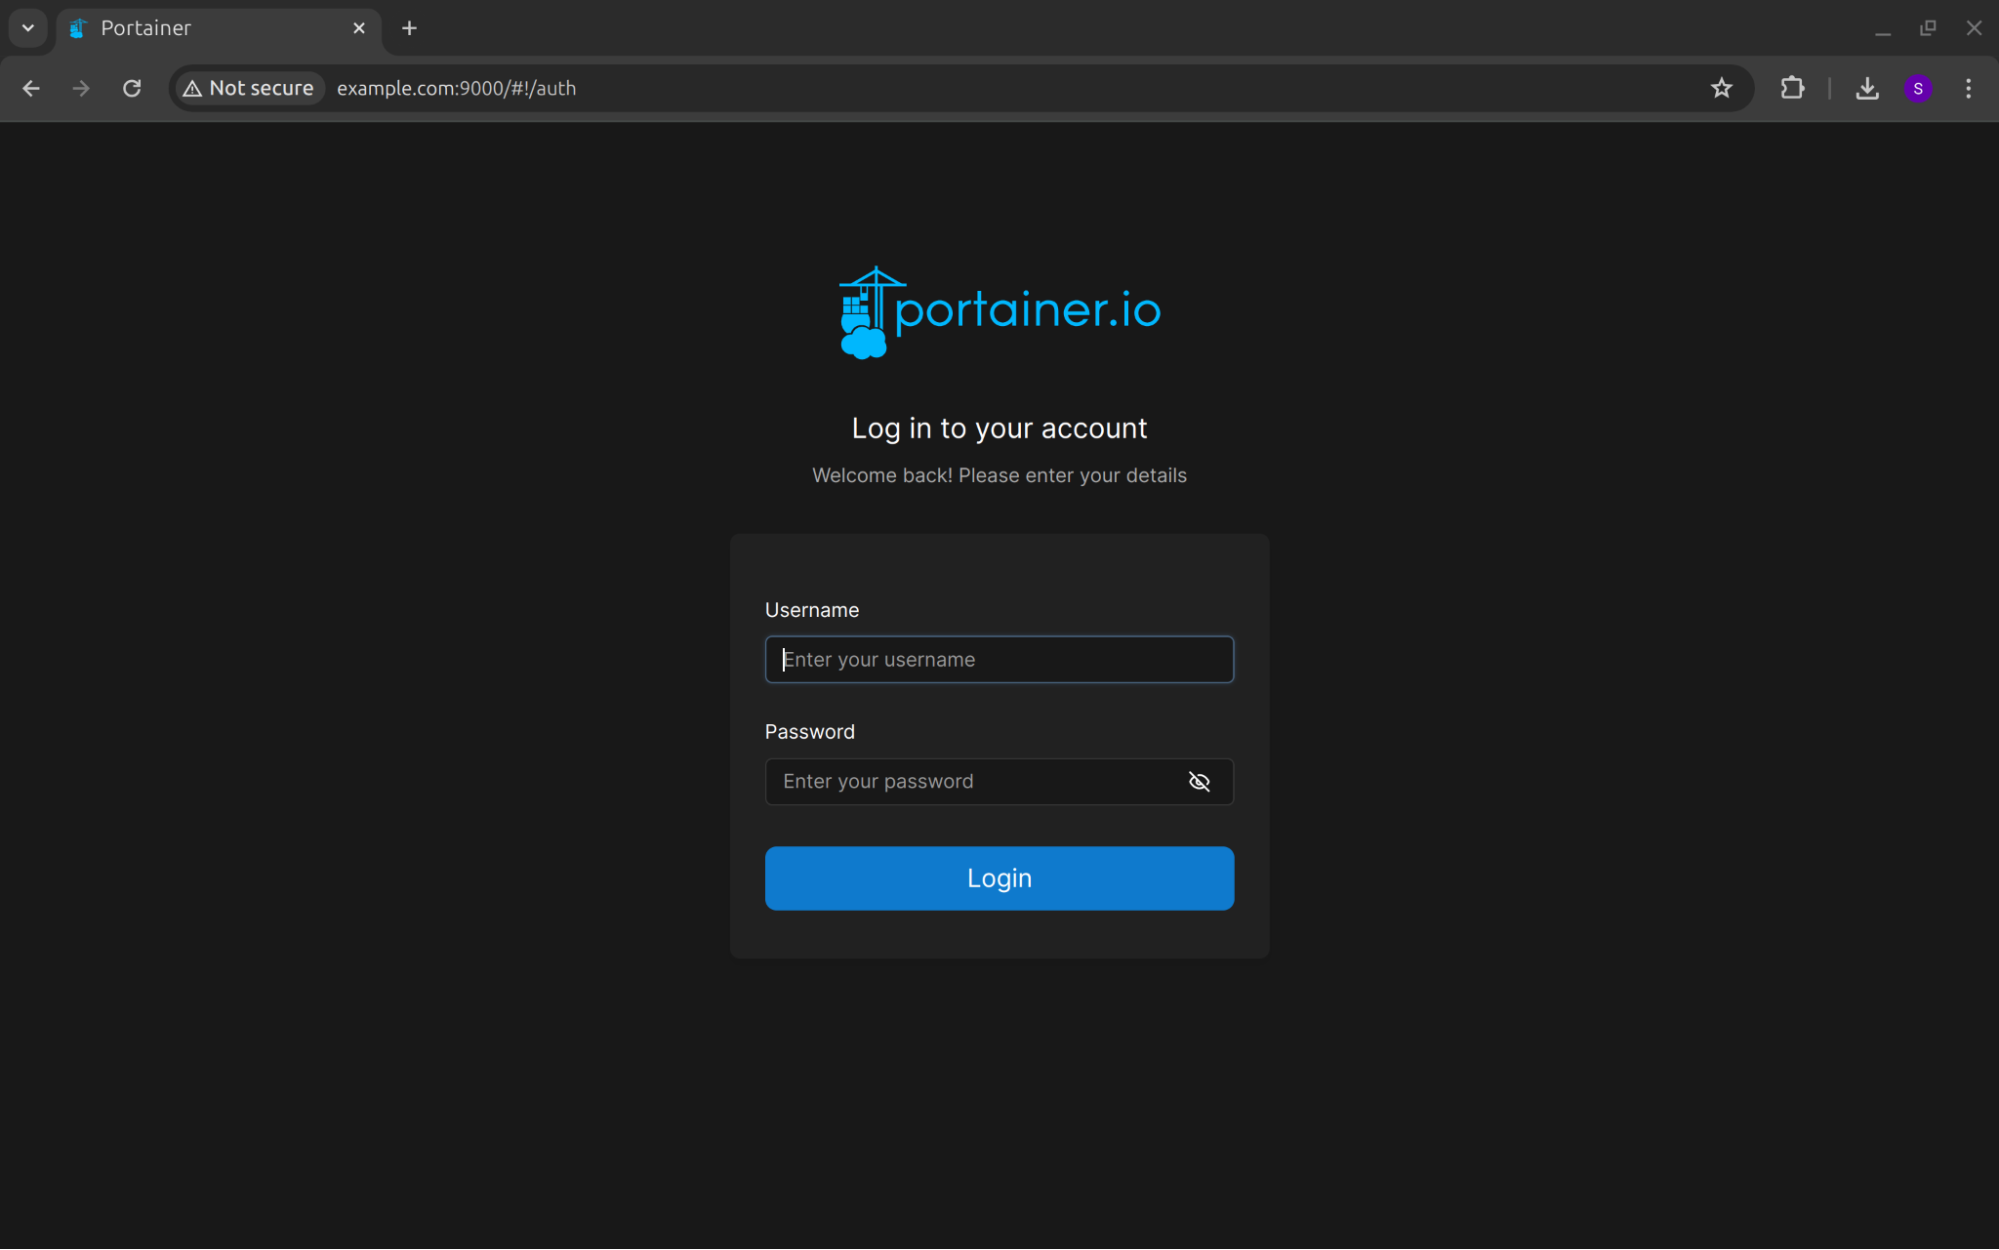 image: Portainer - Login Page